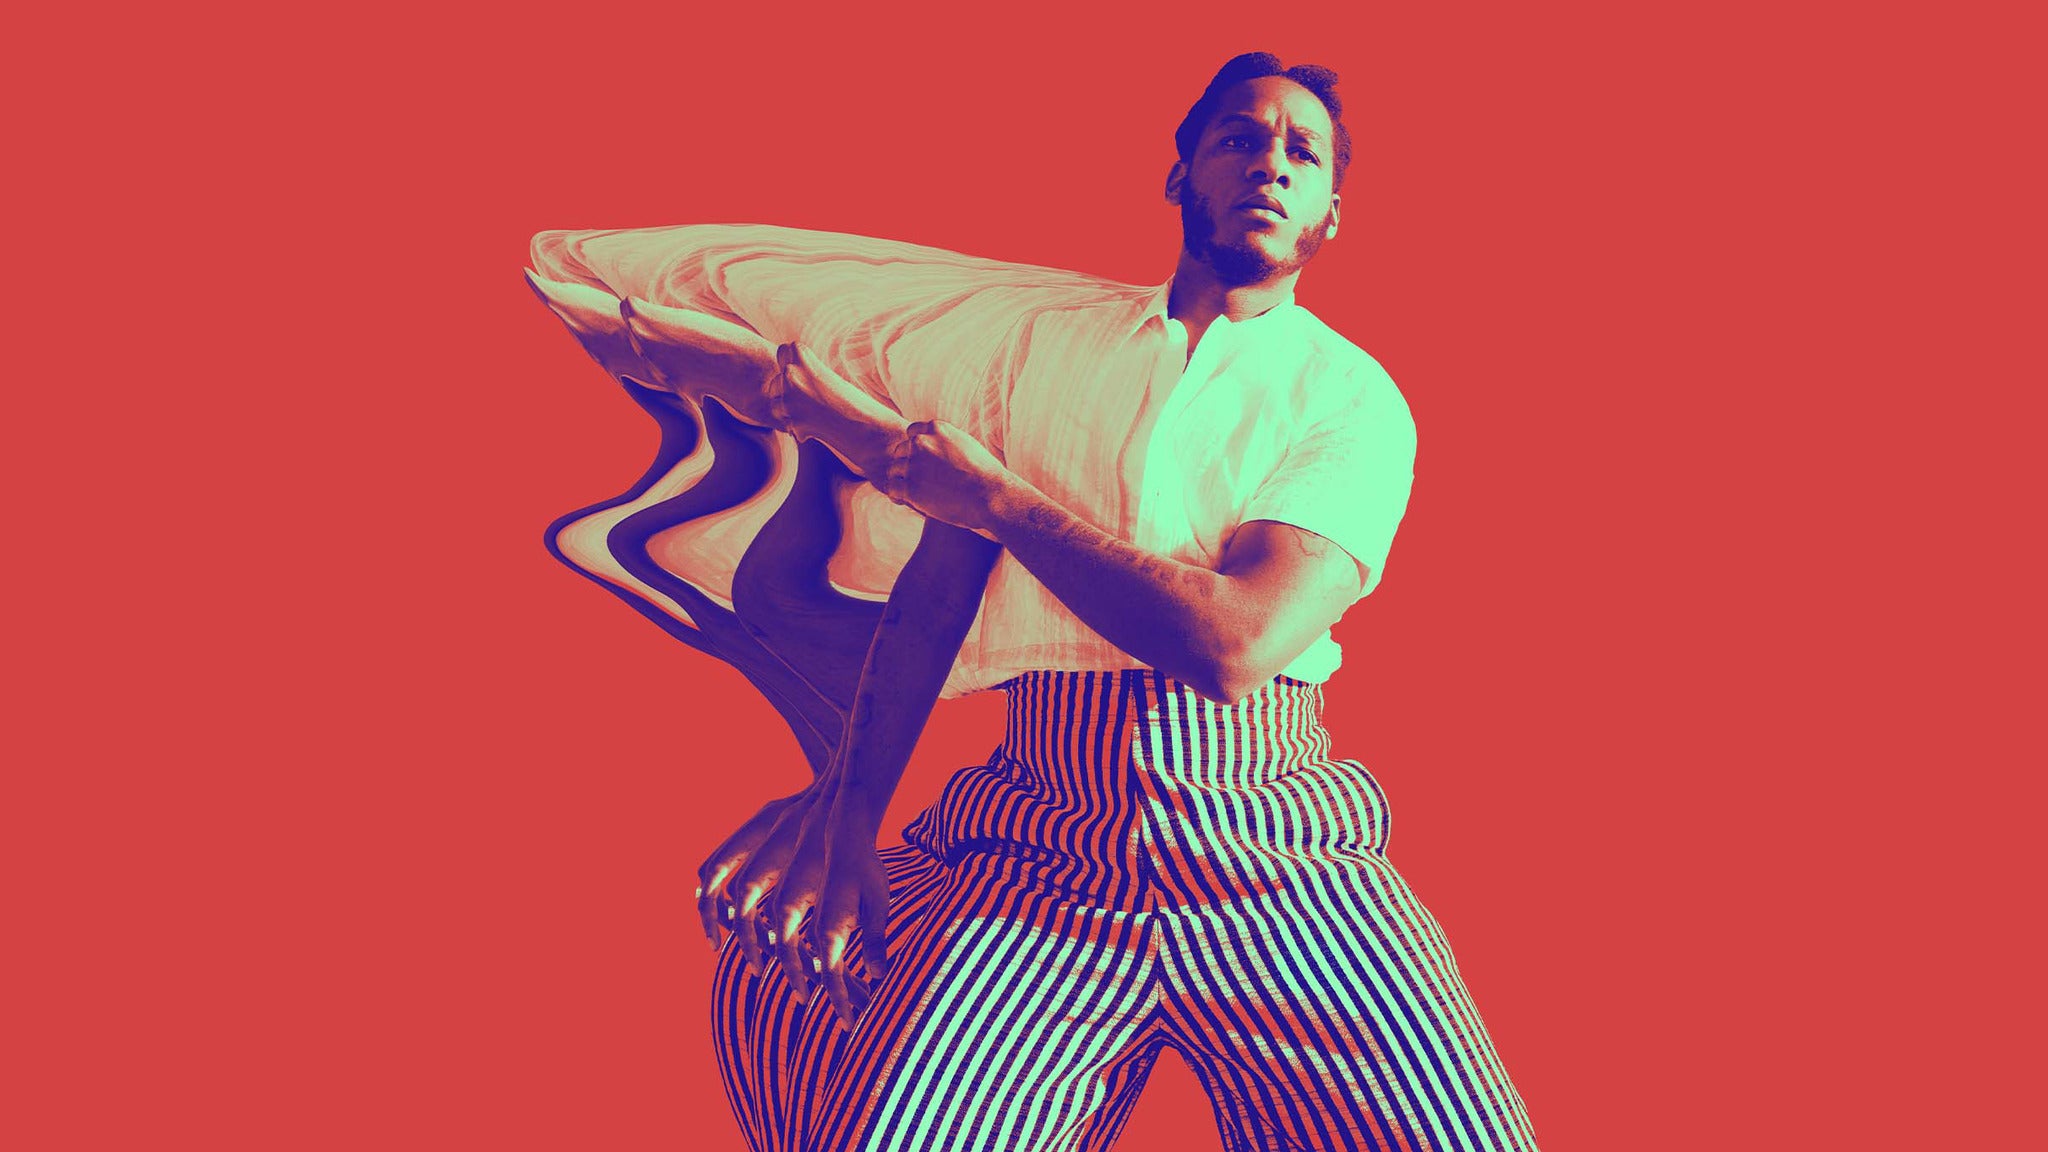 Leon Bridges: The Boundless Tour with Little Dragon pre-sale code for early tickets in Council Bluffs